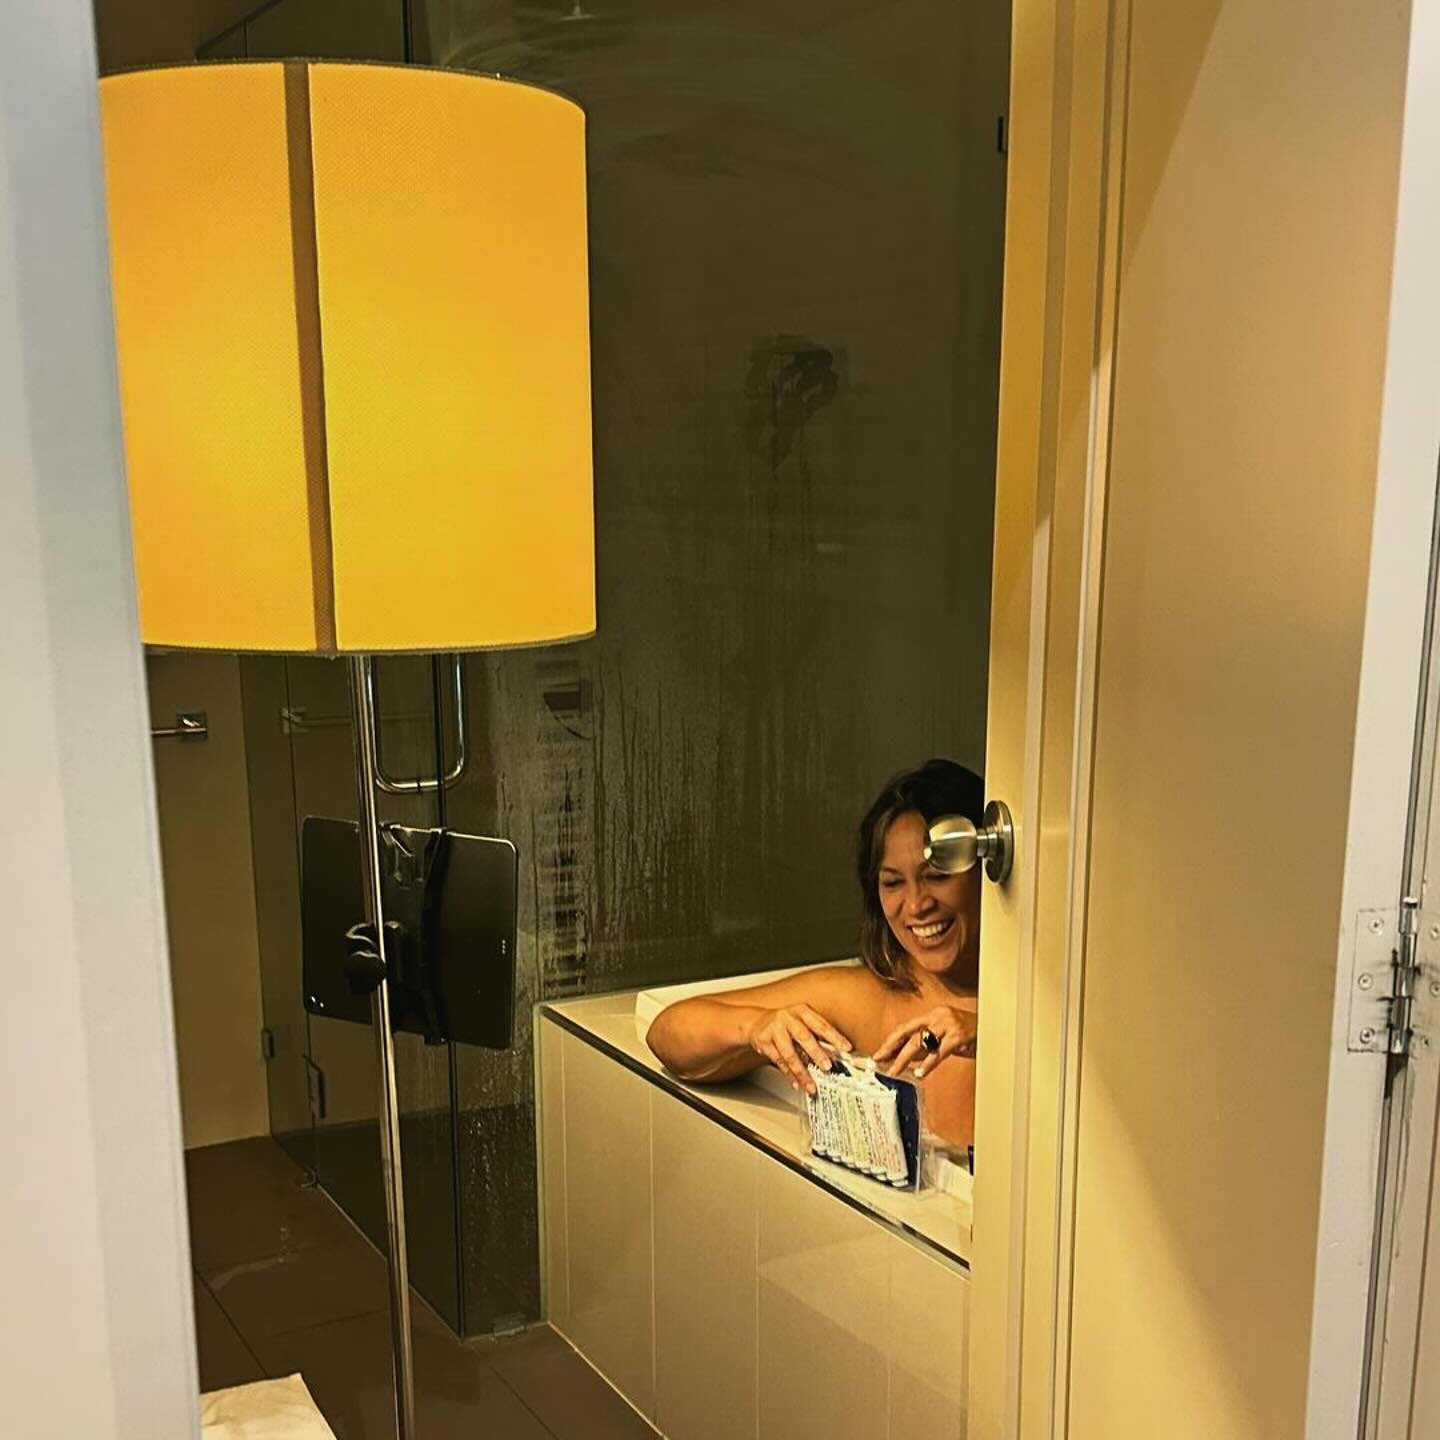 We arrived in Mt Gambier !! @gij_official 

#Repost @leerogers12
・・・
Ceberano #touring101 
Relocate hotel lamp shade to bathroom 🛁
Mount iPad clip onto pole.
Fill bath with hot water &amp; slip in.
Put face mask.
Watch period movie or series such as